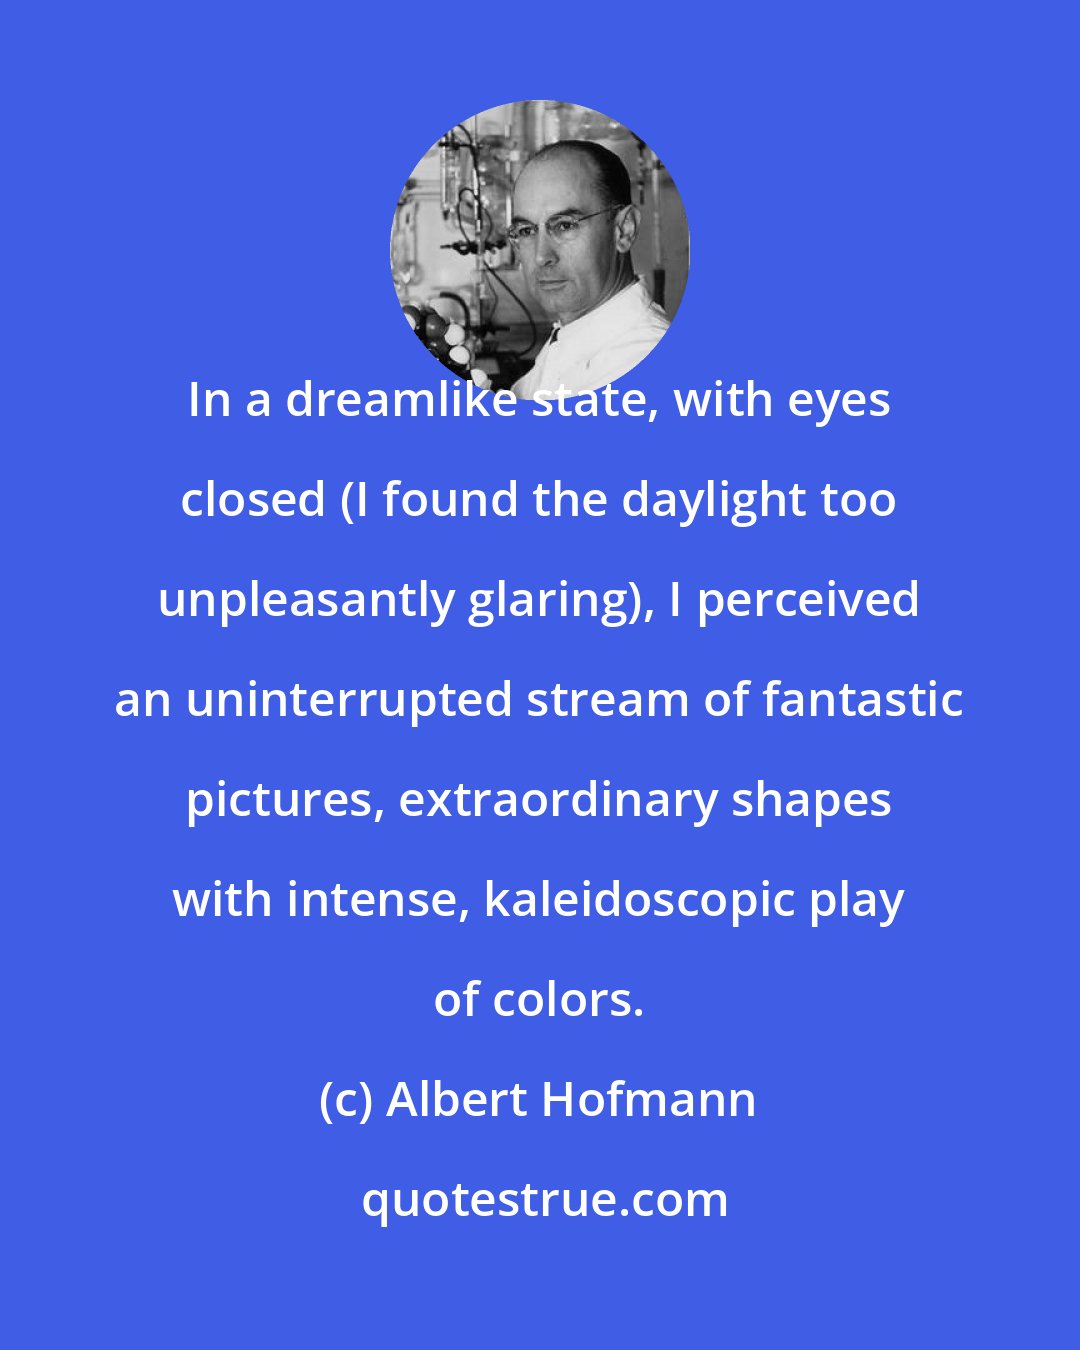 Albert Hofmann: In a dreamlike state, with eyes closed (I found the daylight too unpleasantly glaring), I perceived an uninterrupted stream of fantastic pictures, extraordinary shapes with intense, kaleidoscopic play of colors.